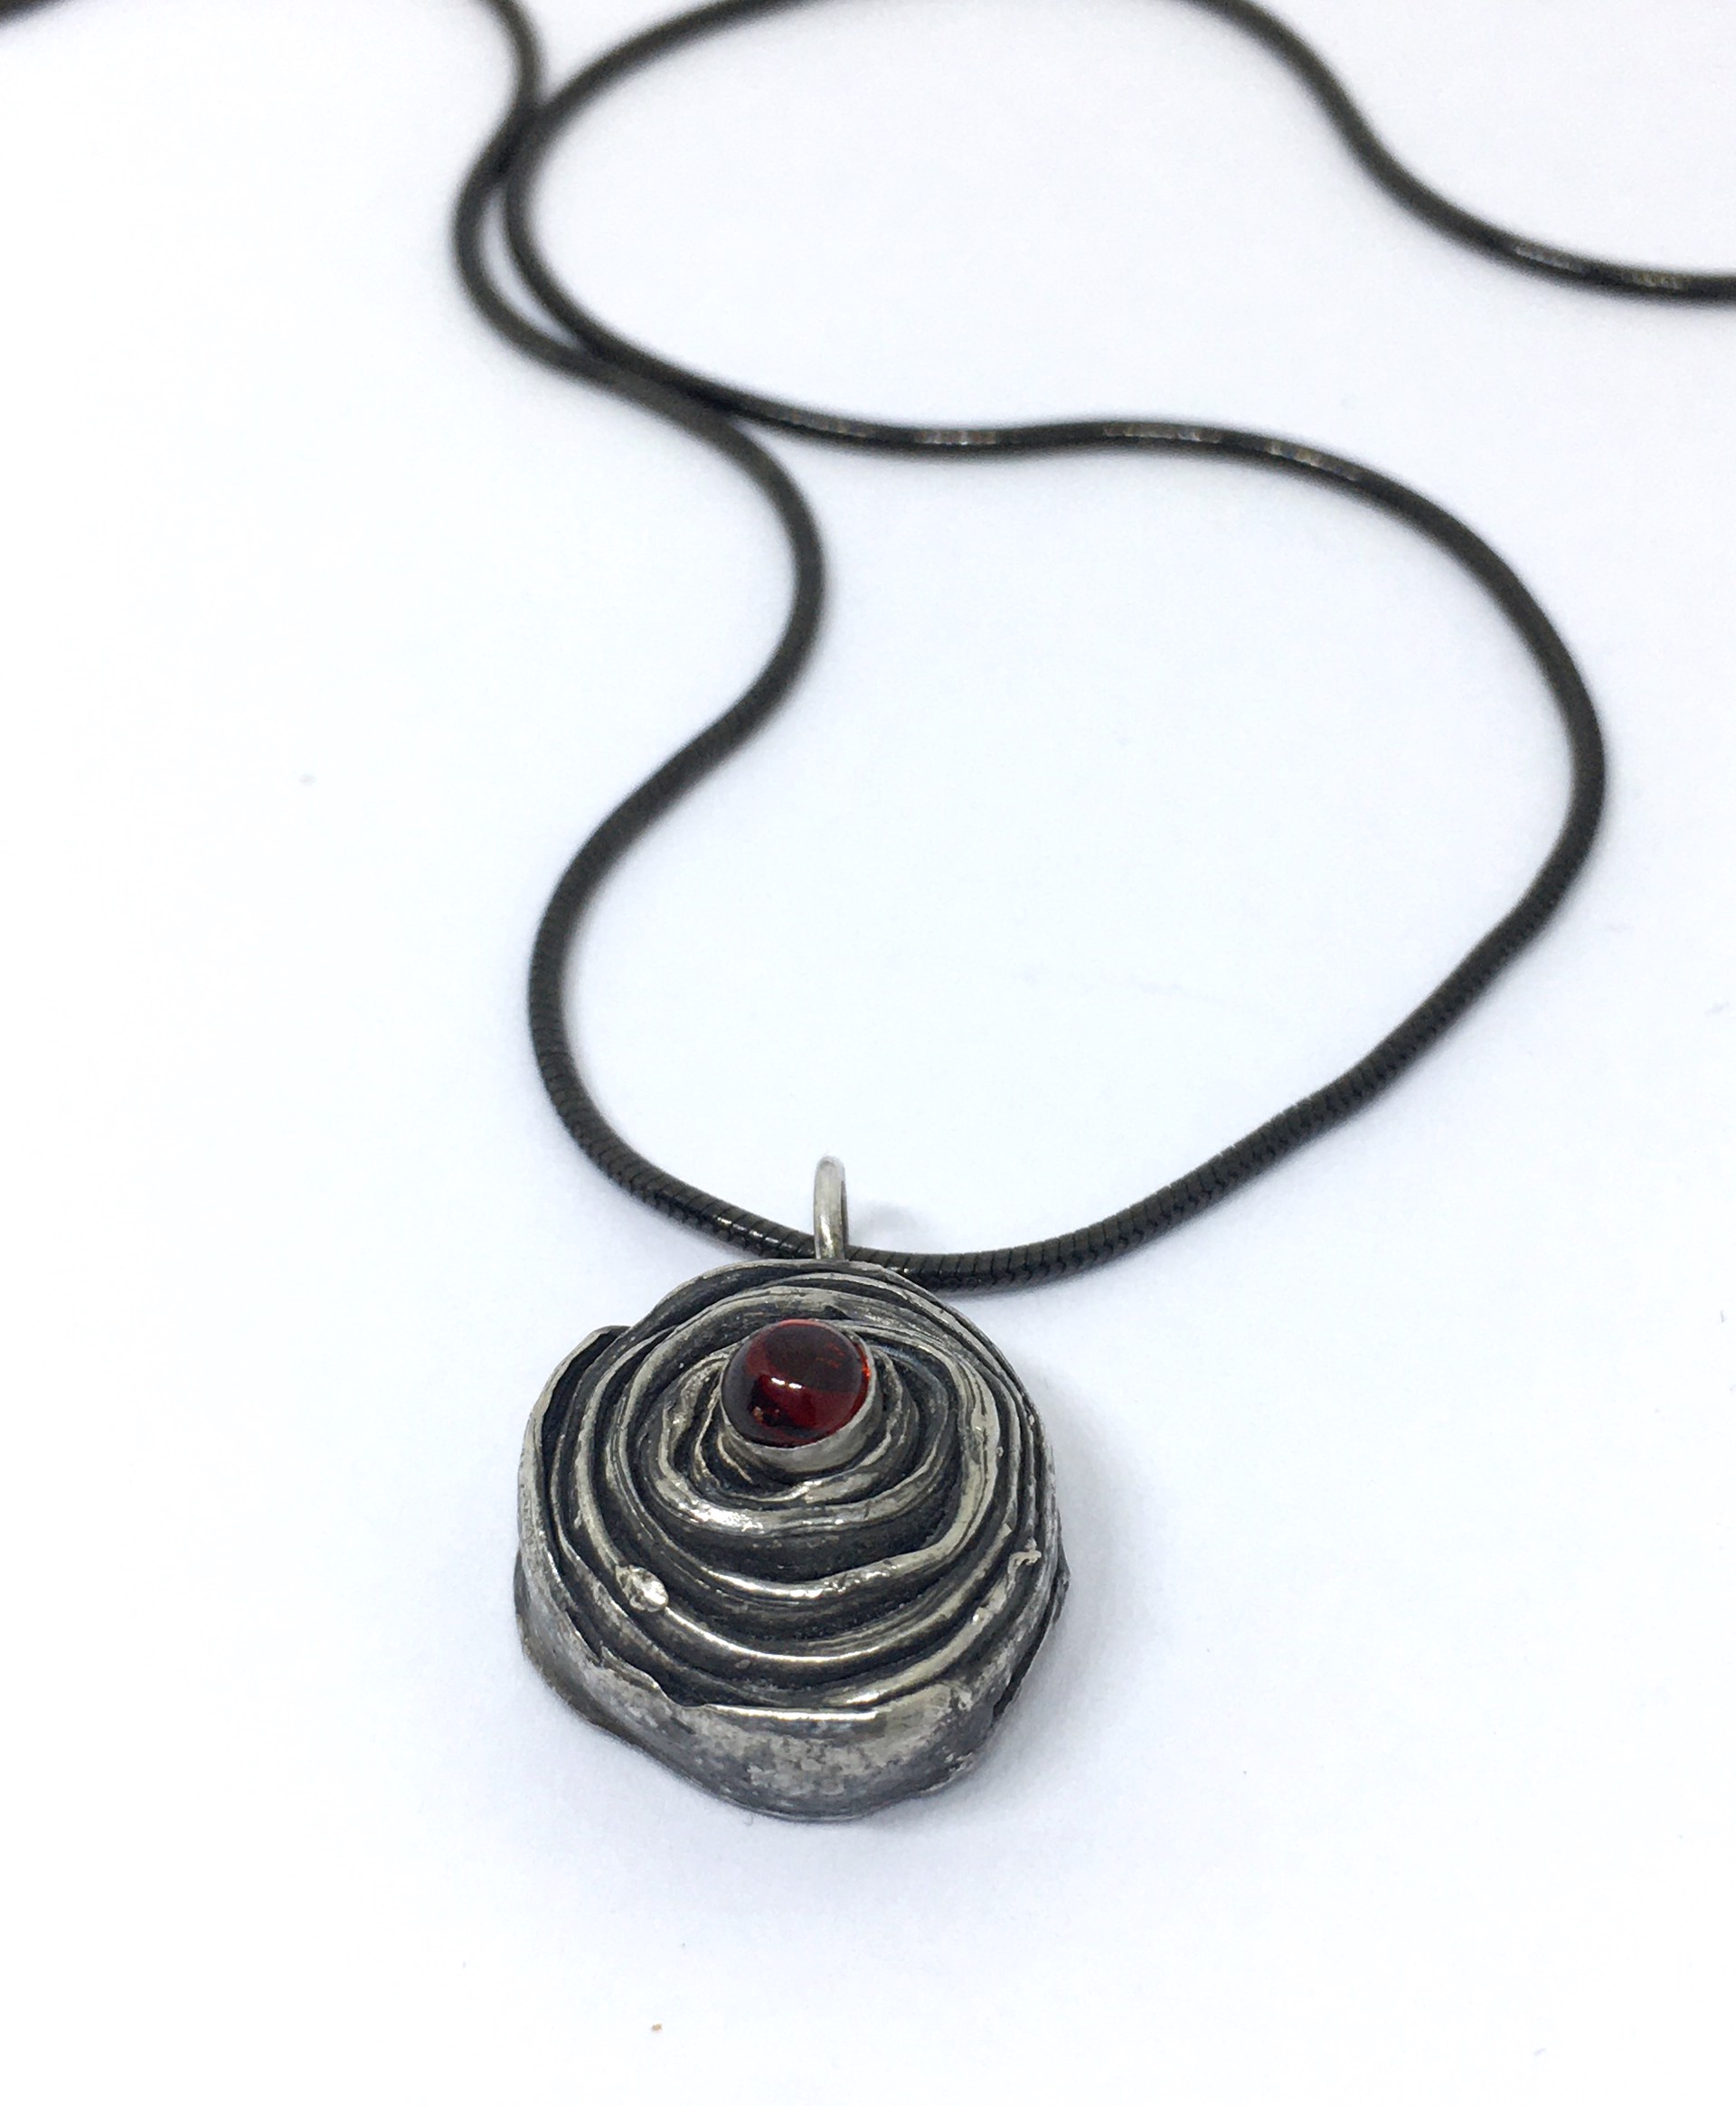 Mitsuro Hikime Rose Pendant Necklace with Garnet on Black Silver Snake Chain by Melicia Phillips